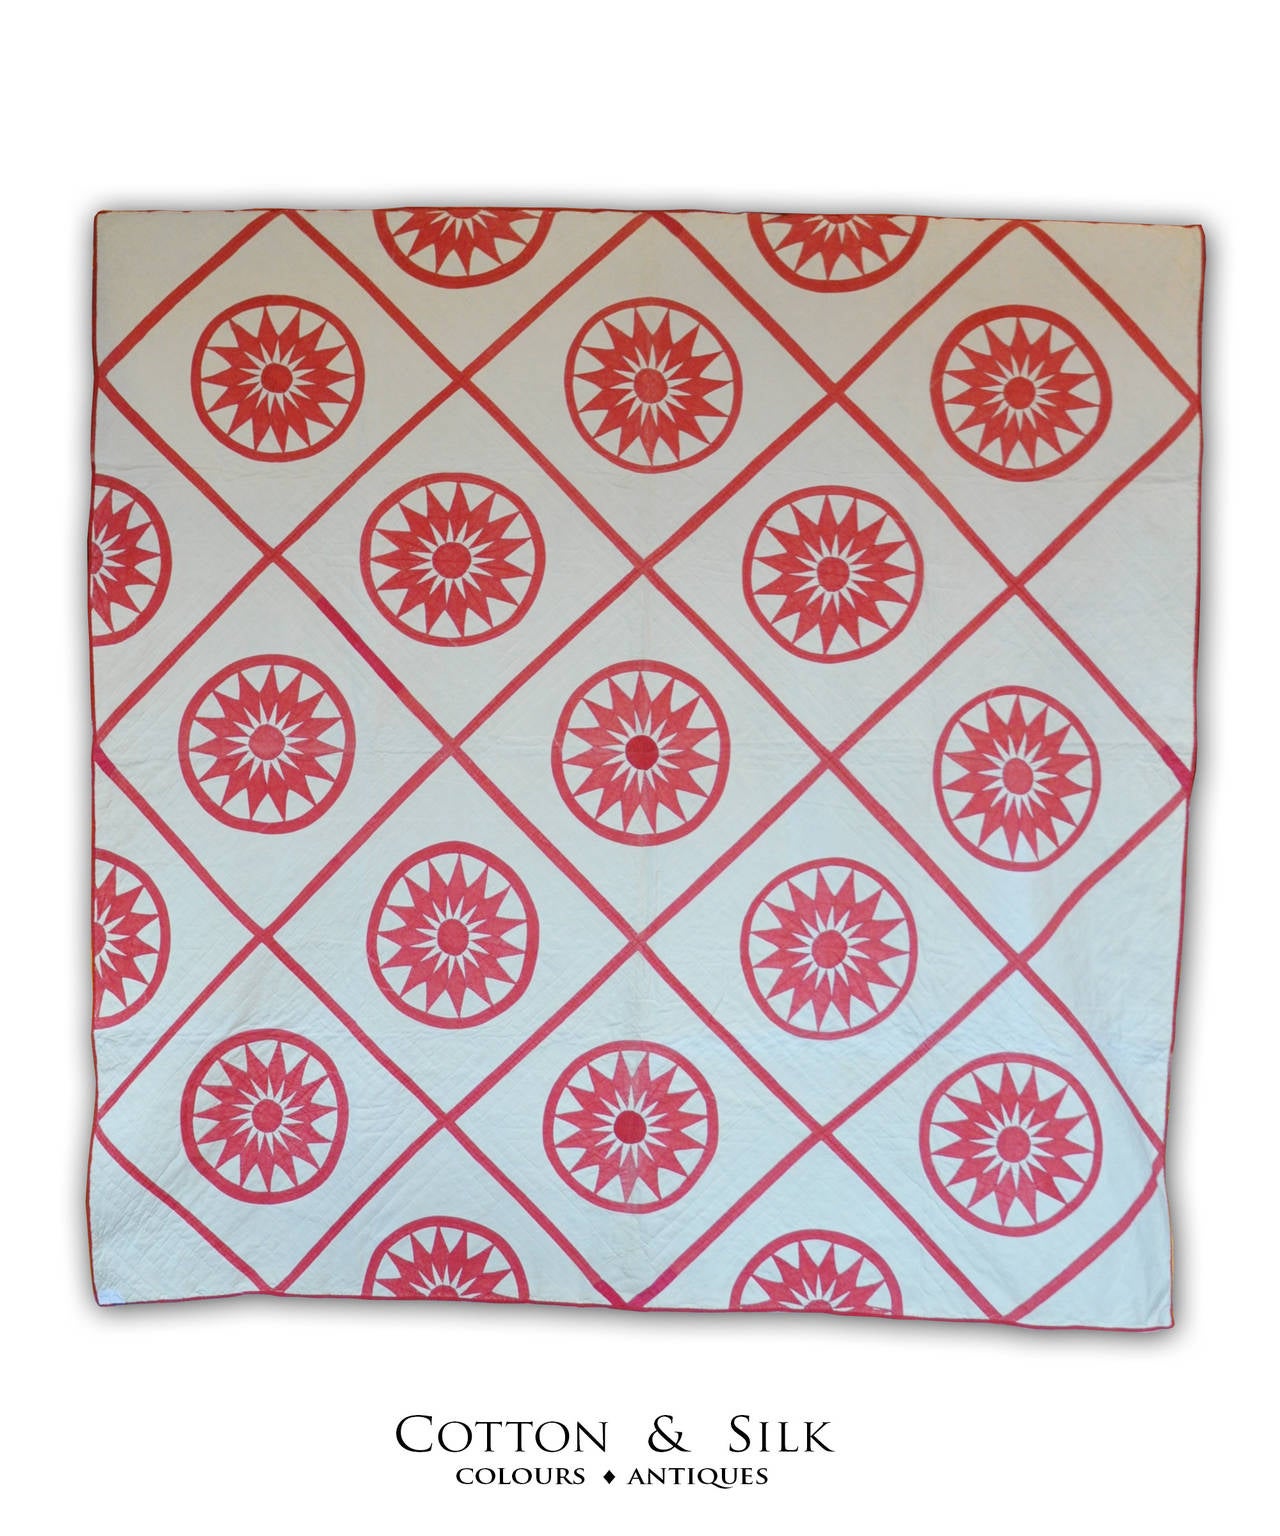 The turkish red of these  Mariner Compasses is of a striking freshness on the white background .This is a beautiful antique quilt with a modern look.